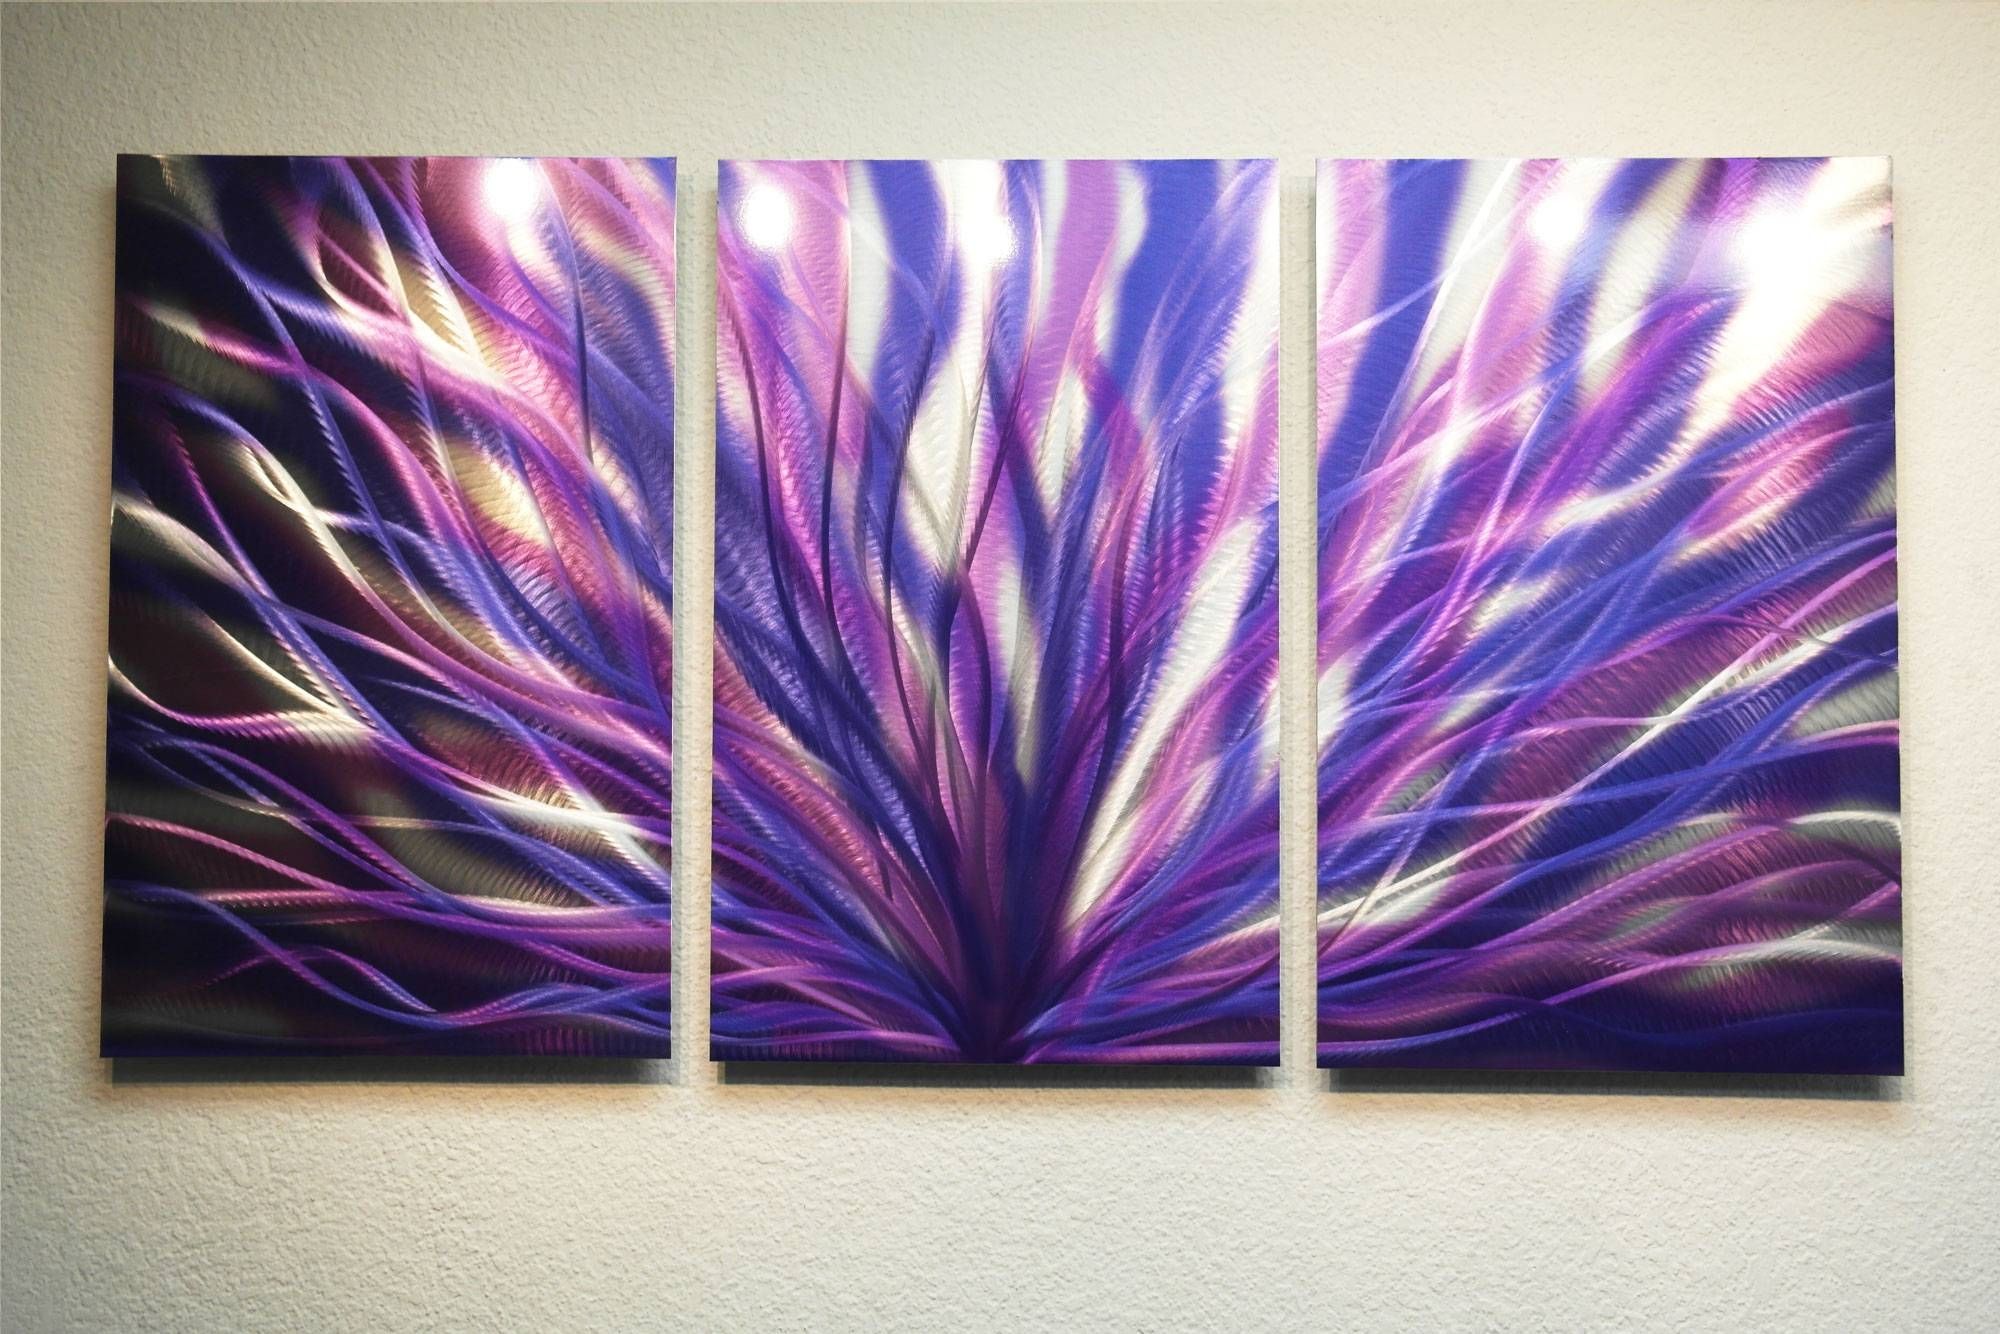 Radiance Purple 47 – Metal Wall Art Abstract Sculpture Modern With Latest Purple Wall Art (View 10 of 20)